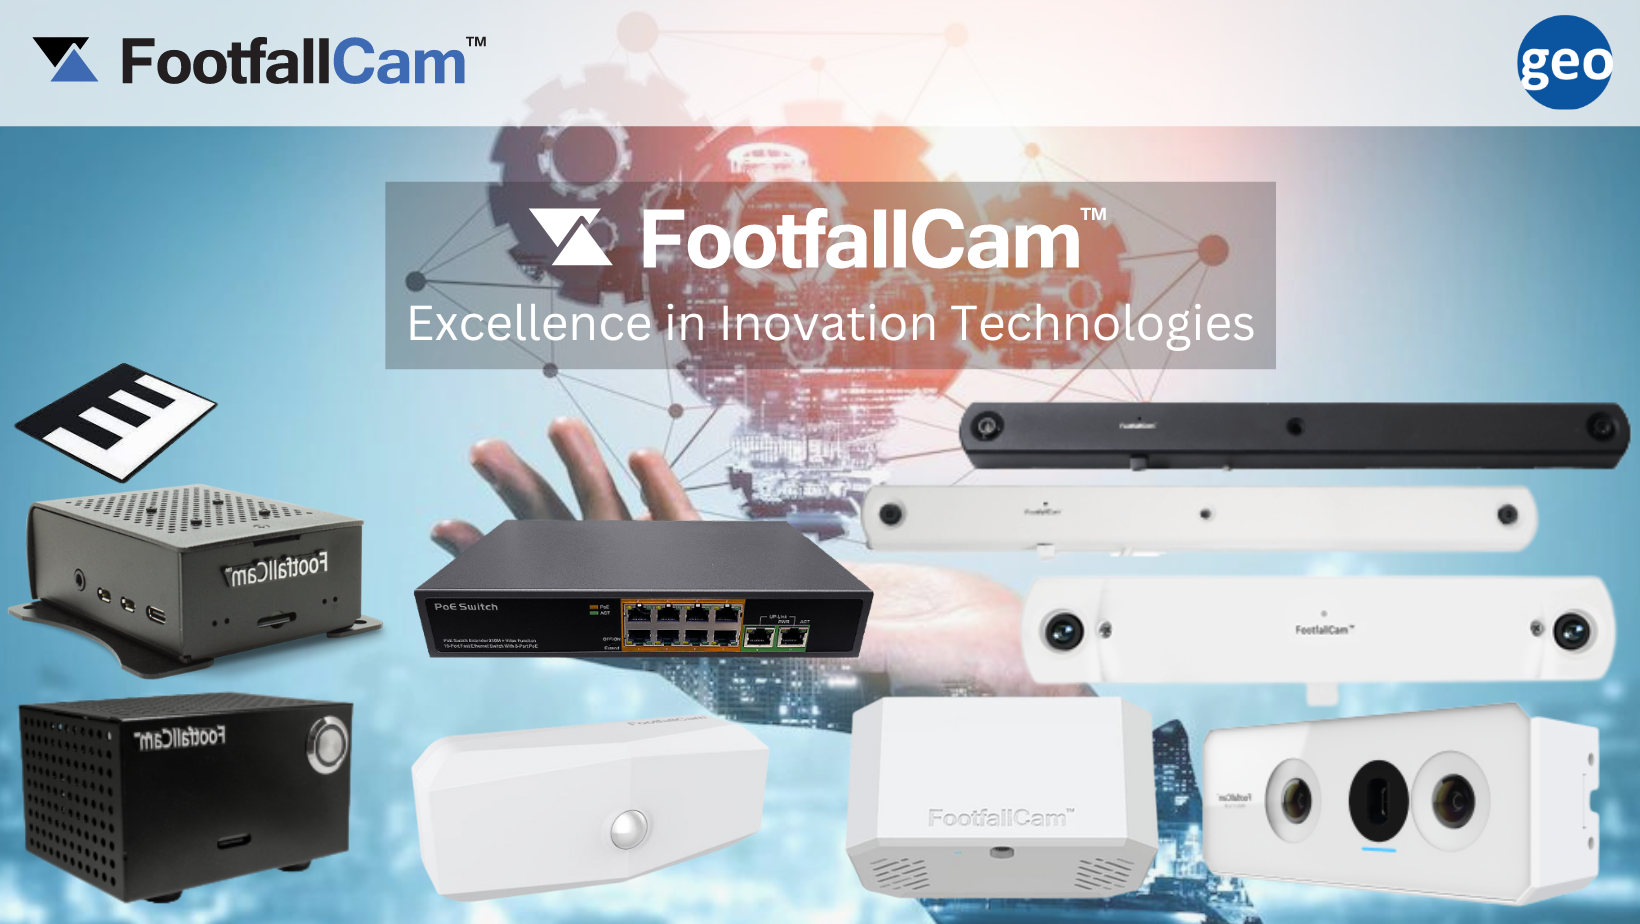 FootfallCam: Excellence in People Counting Technologies